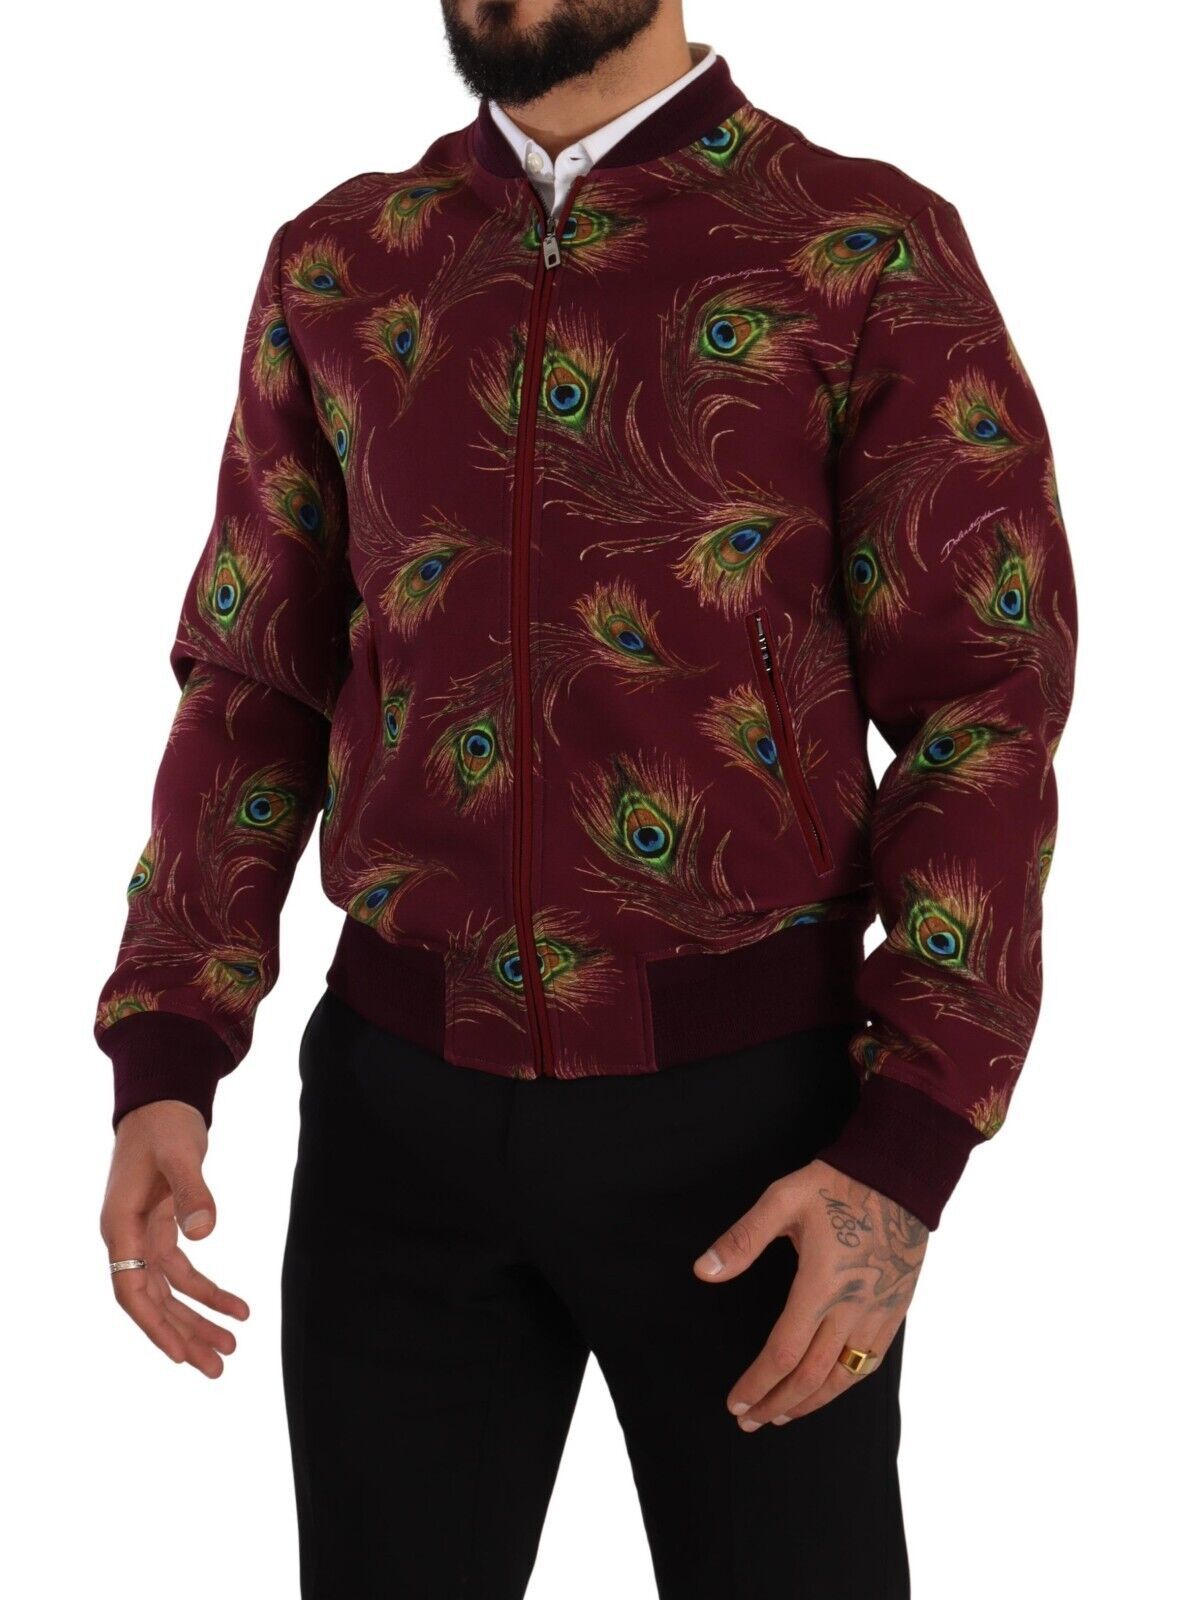 Radiant Red Peacock Print Bomber Jacket